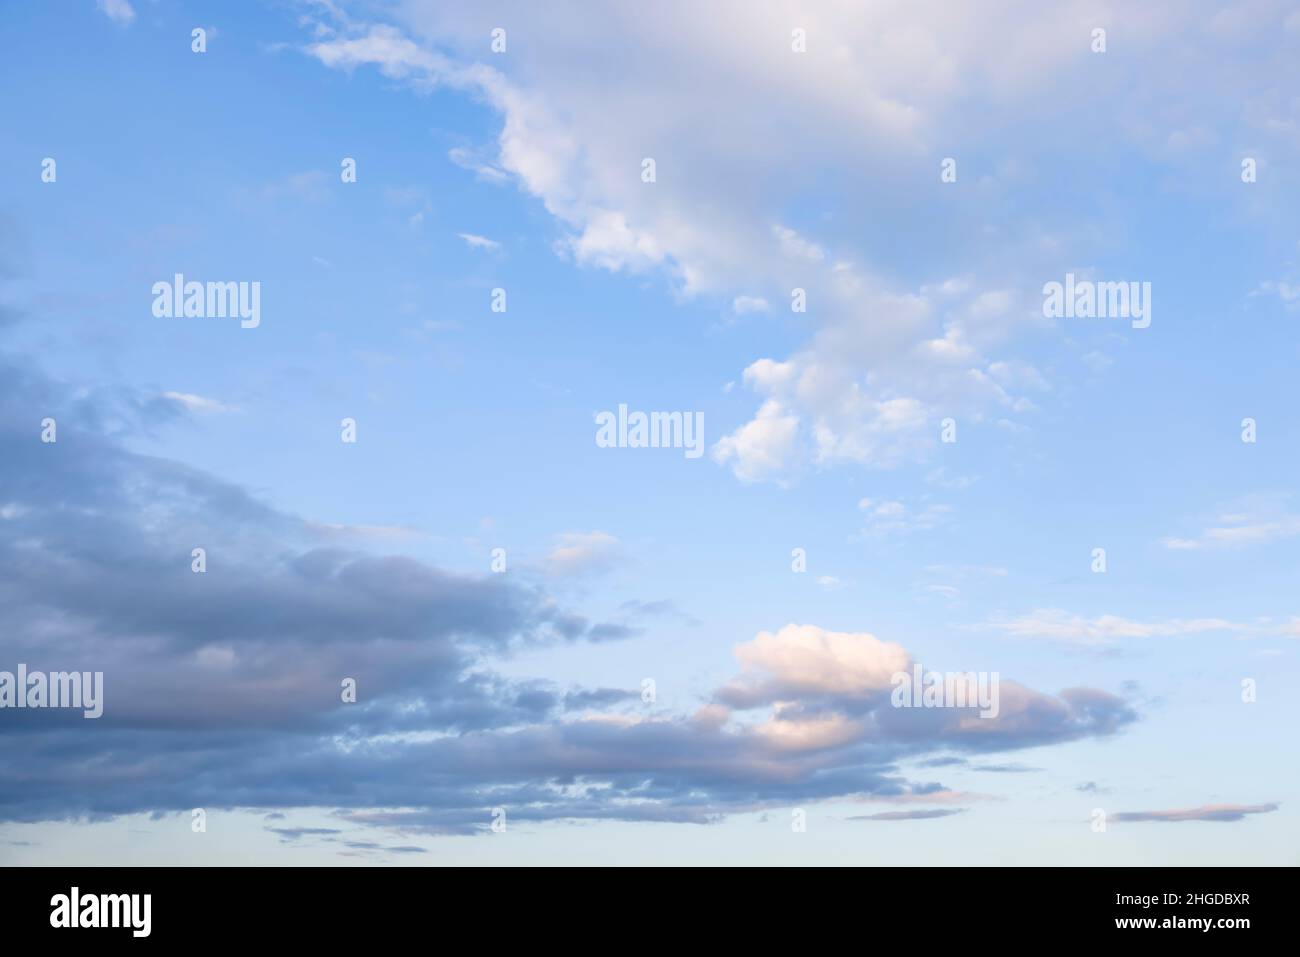 Blue sky with rain clouds in late afternoon. Ideal for a background or template Stock Photo